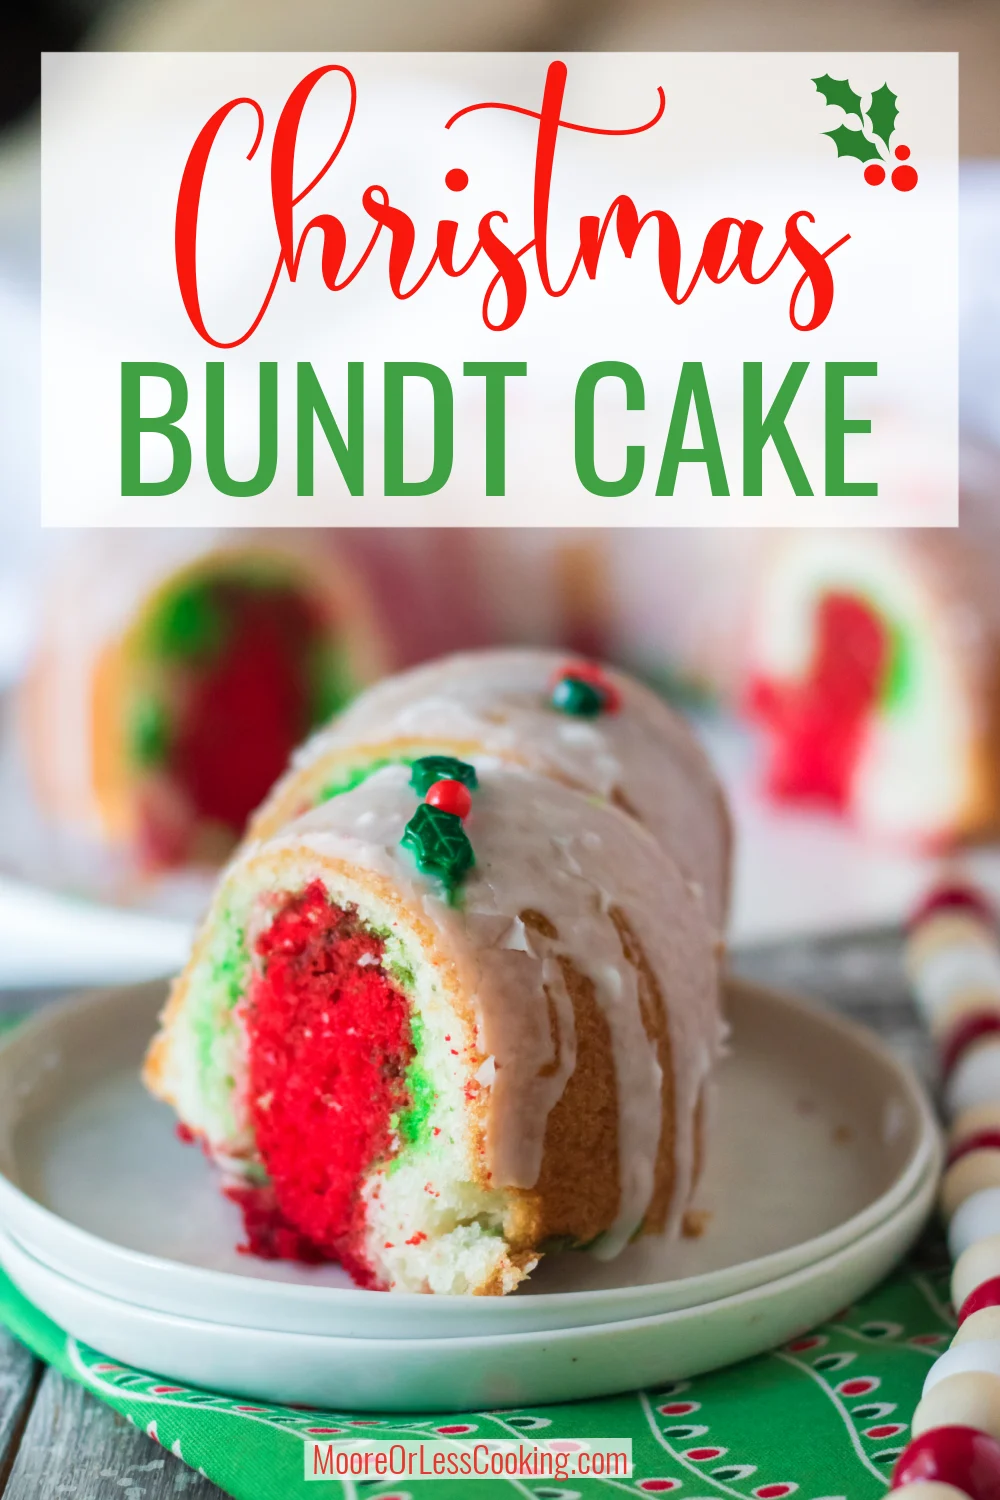 Impress your friends and family this holiday season with this easy to make Christmas Bundt Cake. With swirls of red and green making a festive appearance when sliced, the icing on the cake is a drizzled glaze that's garnished with holly and berry decorative sprinkles. via @Mooreorlesscook